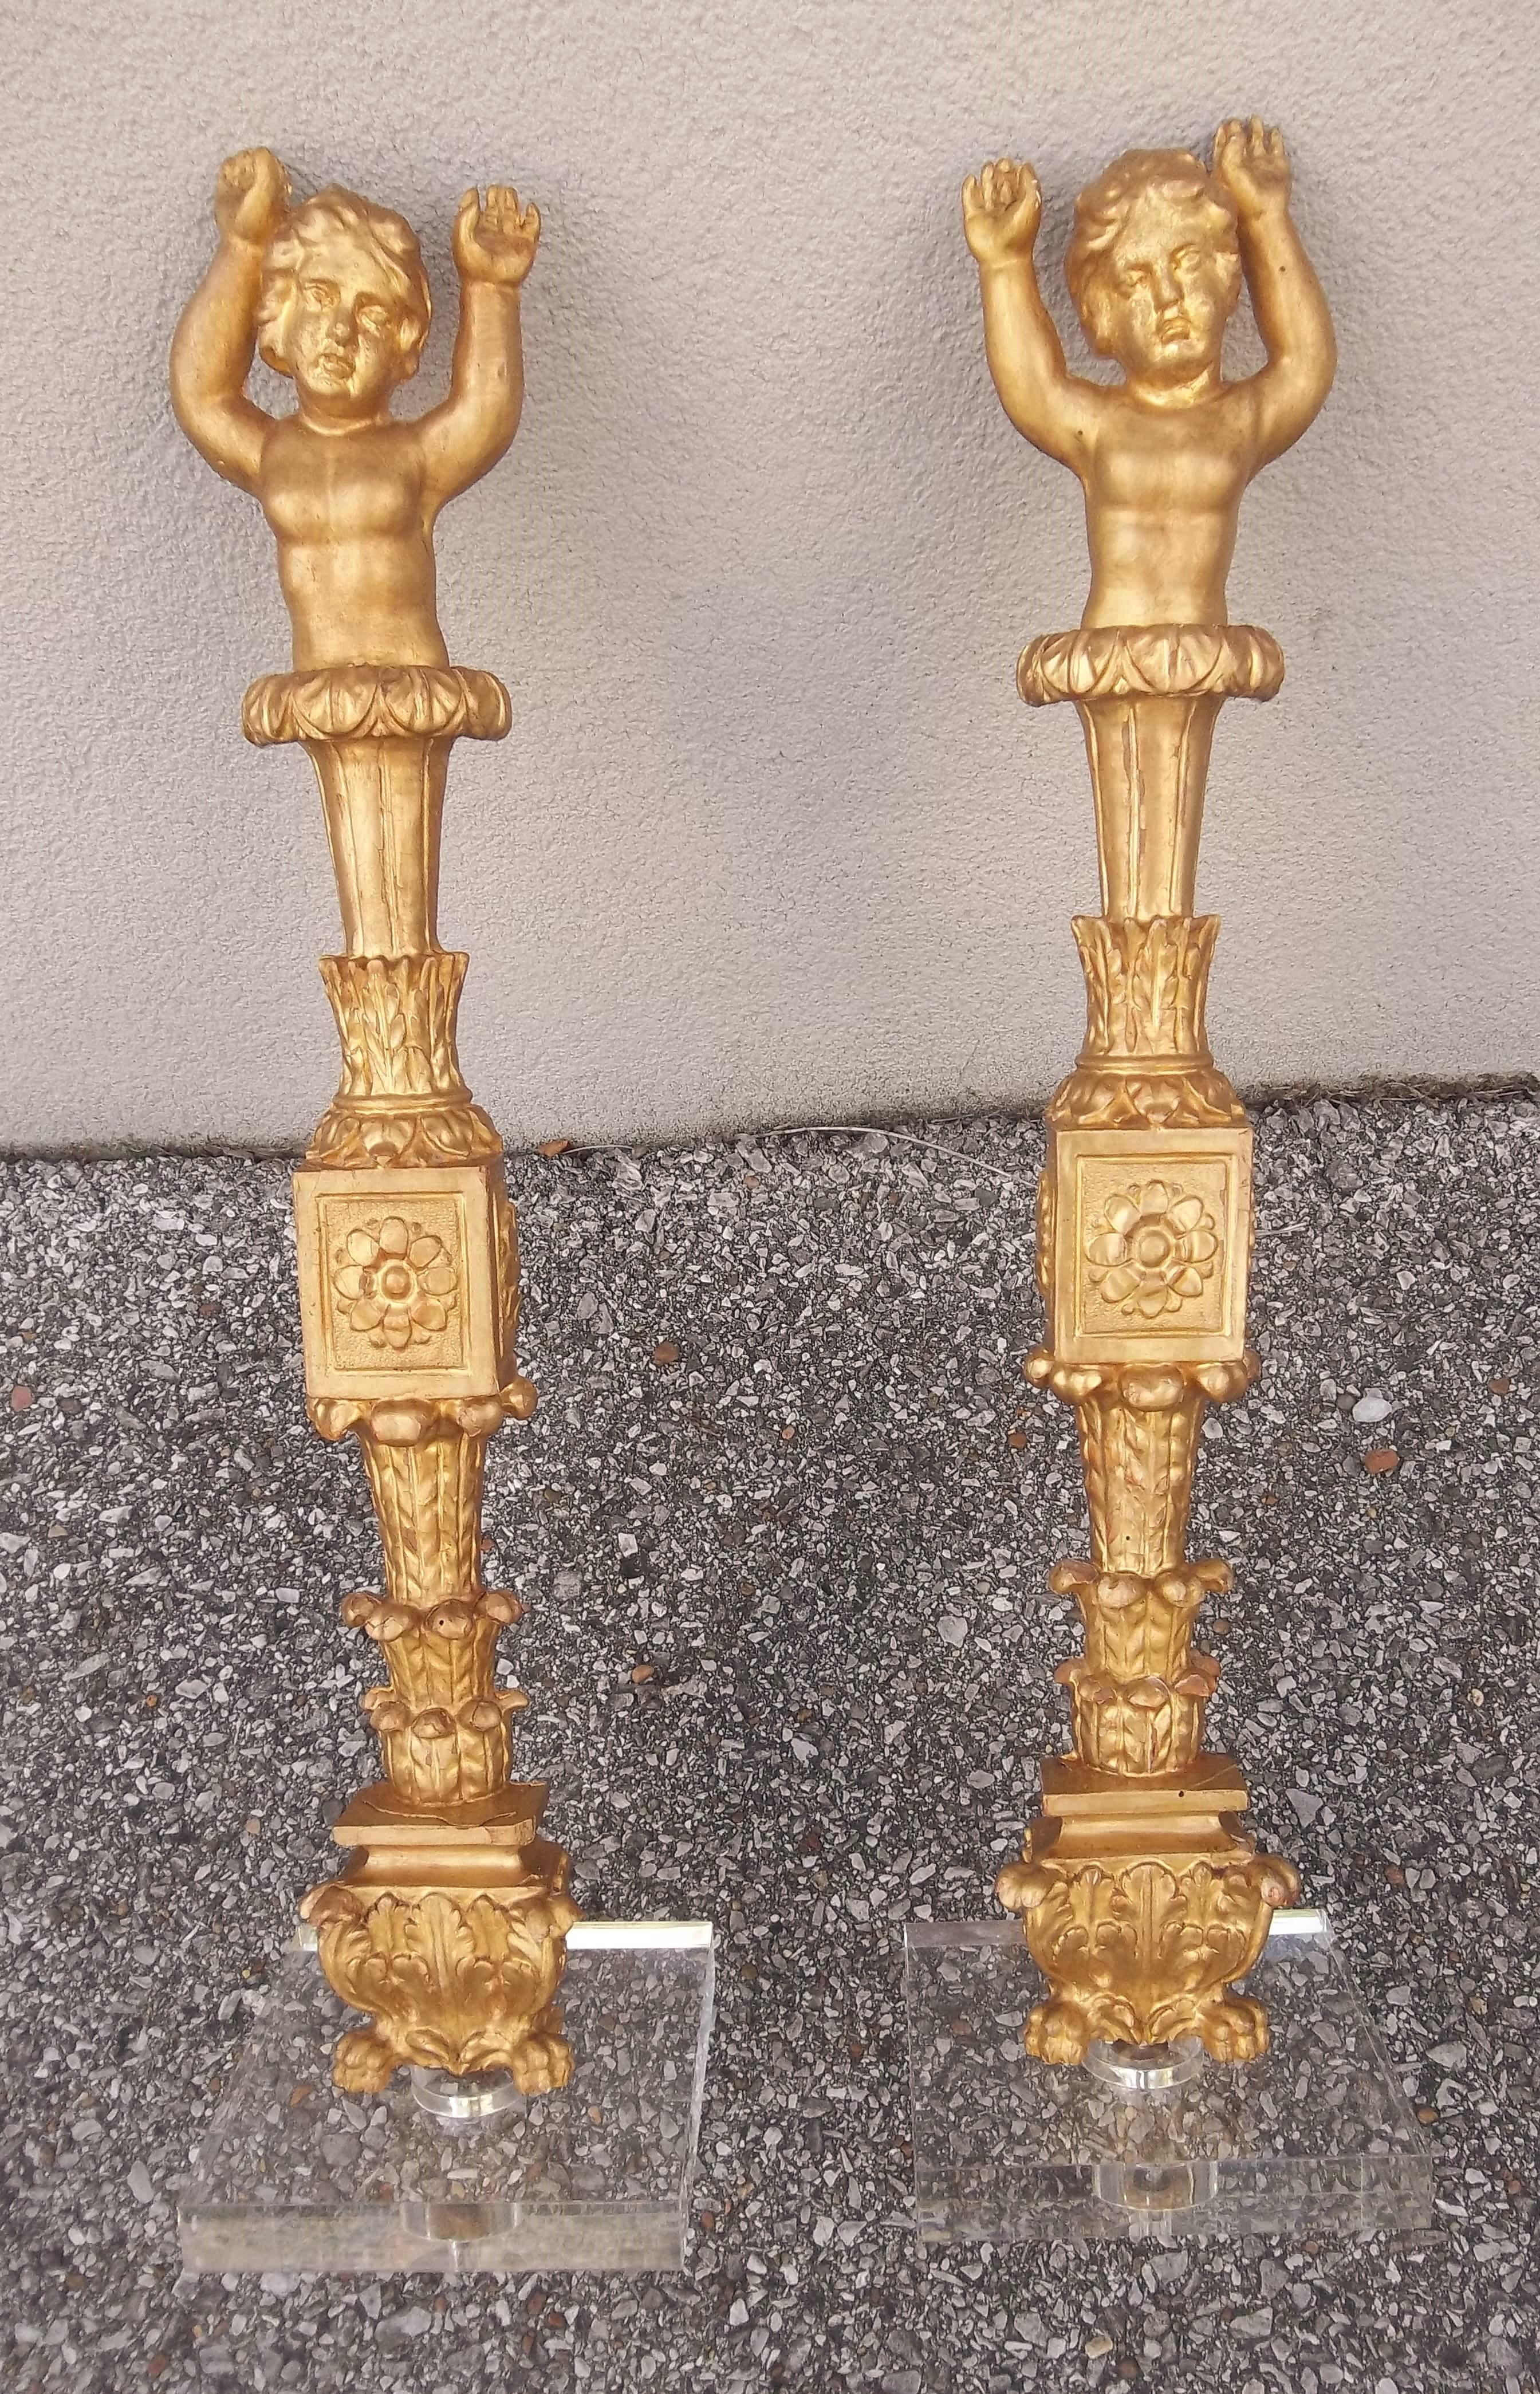 Louis XVI Pair of Carved Giltwood Figural Architectural or Furniture Pilaster Fragments